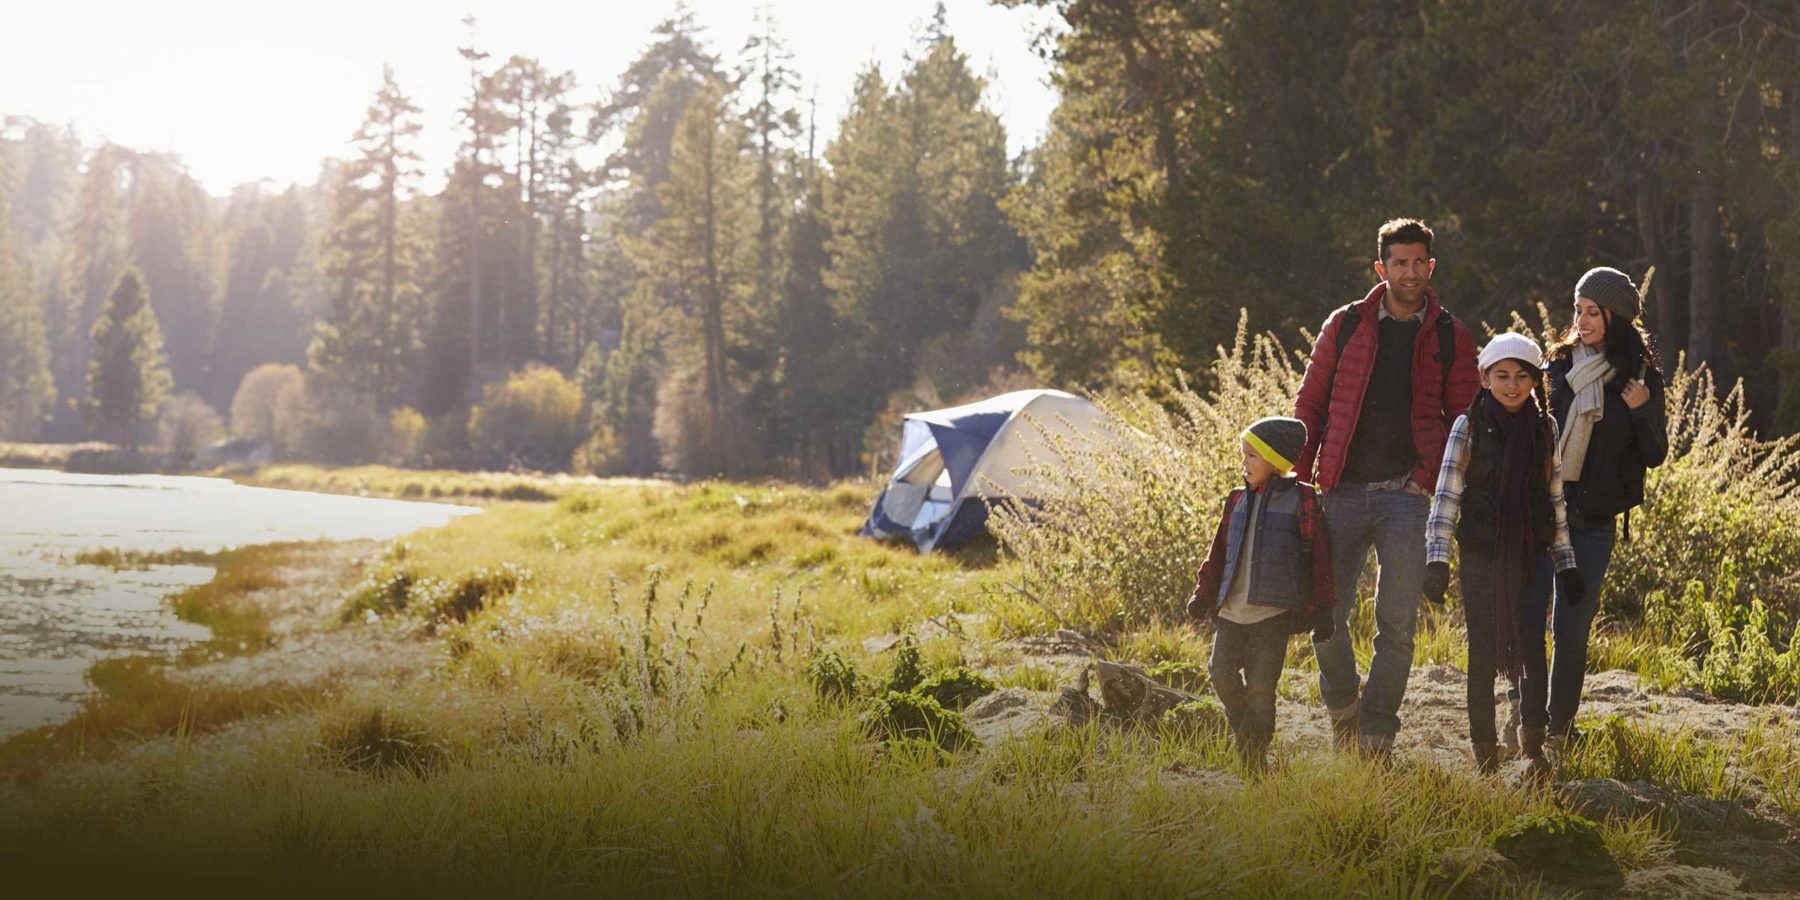 A family walks away from their tent, which is situated beside a forest and a secluded river.